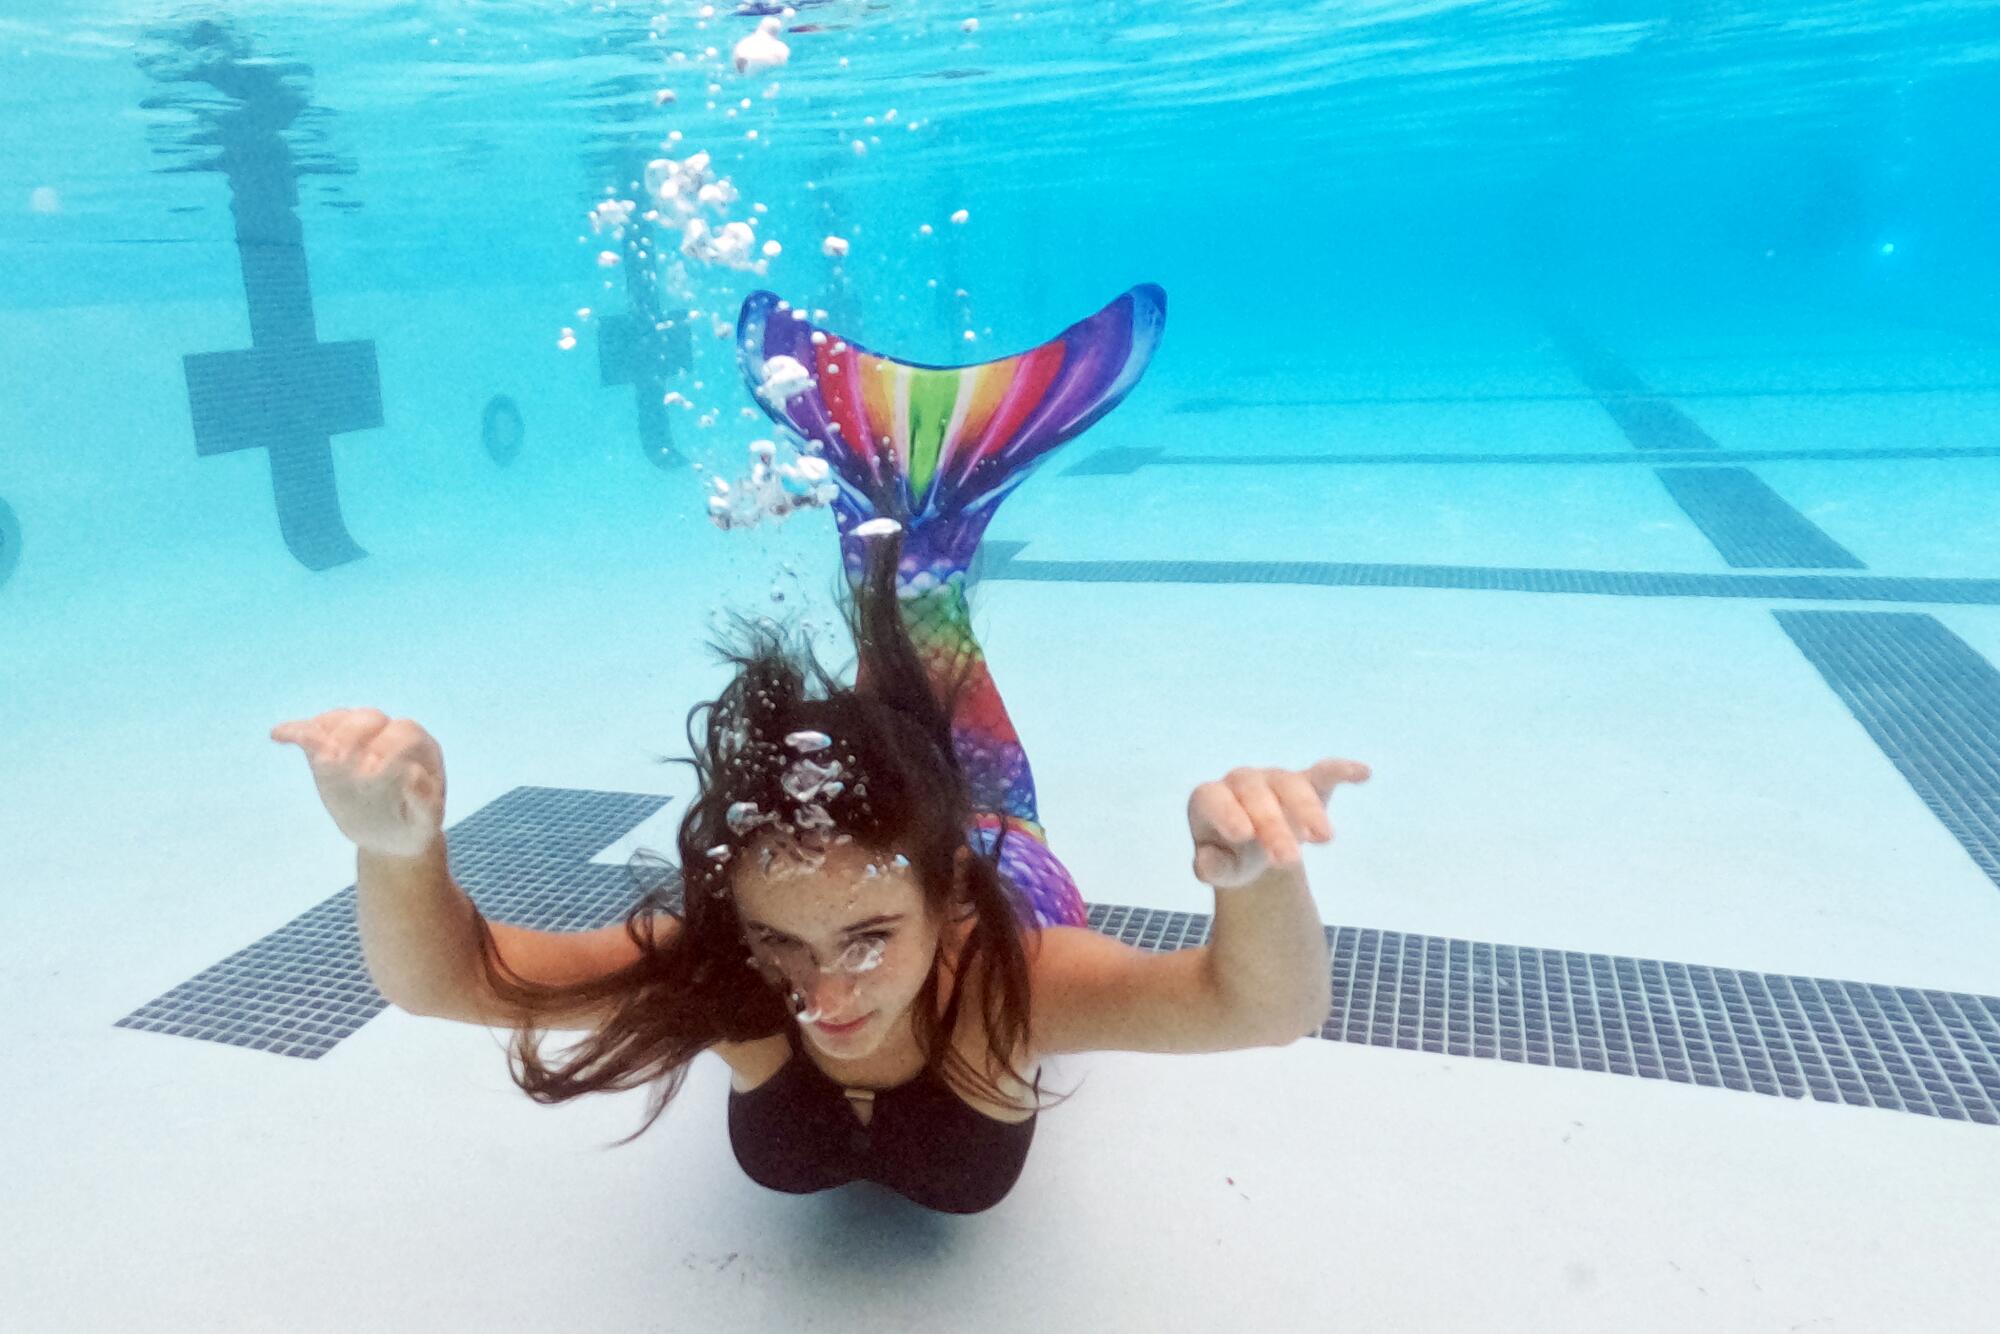 Emily Jordan demonstrates how to sink to the bottom of the pool as a mermaid.